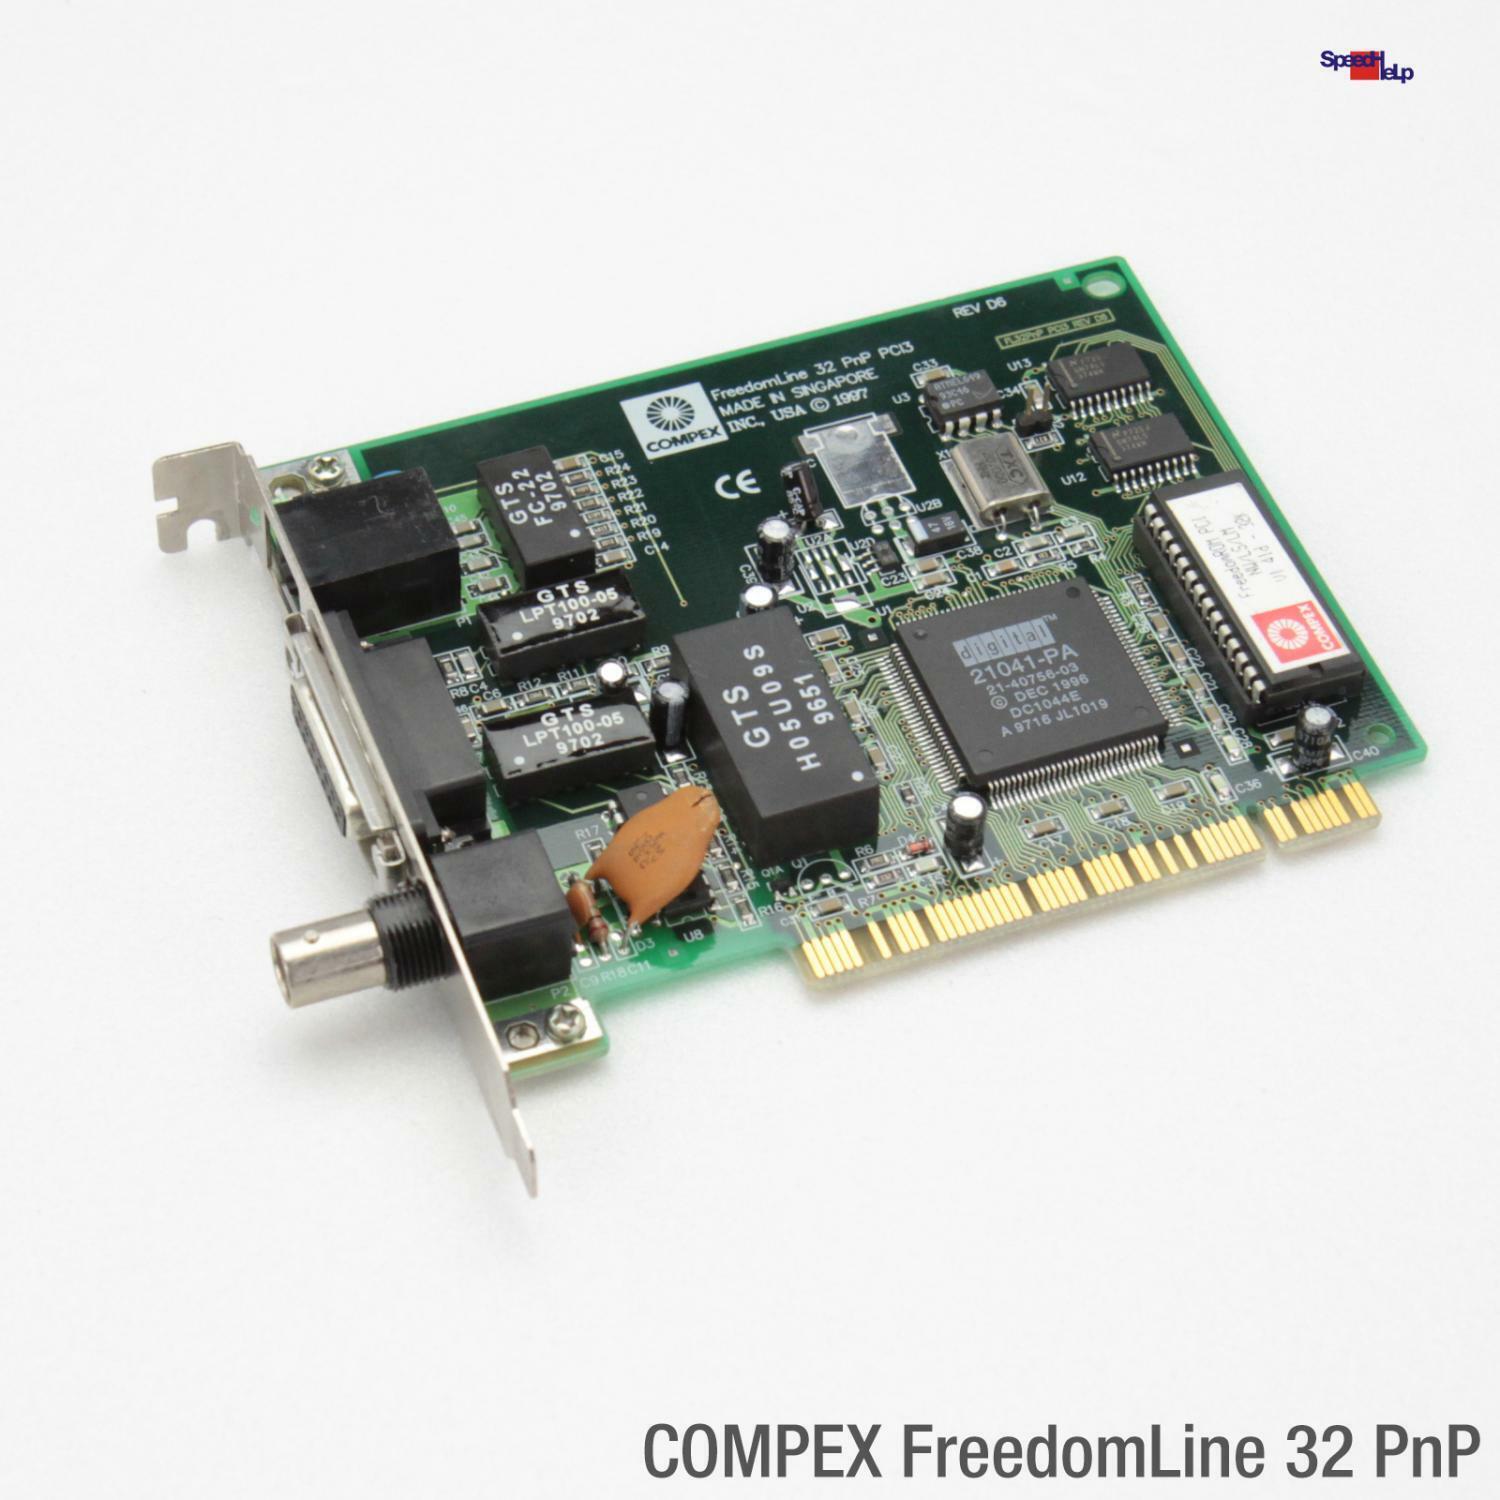 Compex Freedom Line 32 Pnp PCI3 BNC Network Card Ethernet Lan NW / Ls / Lm ROM